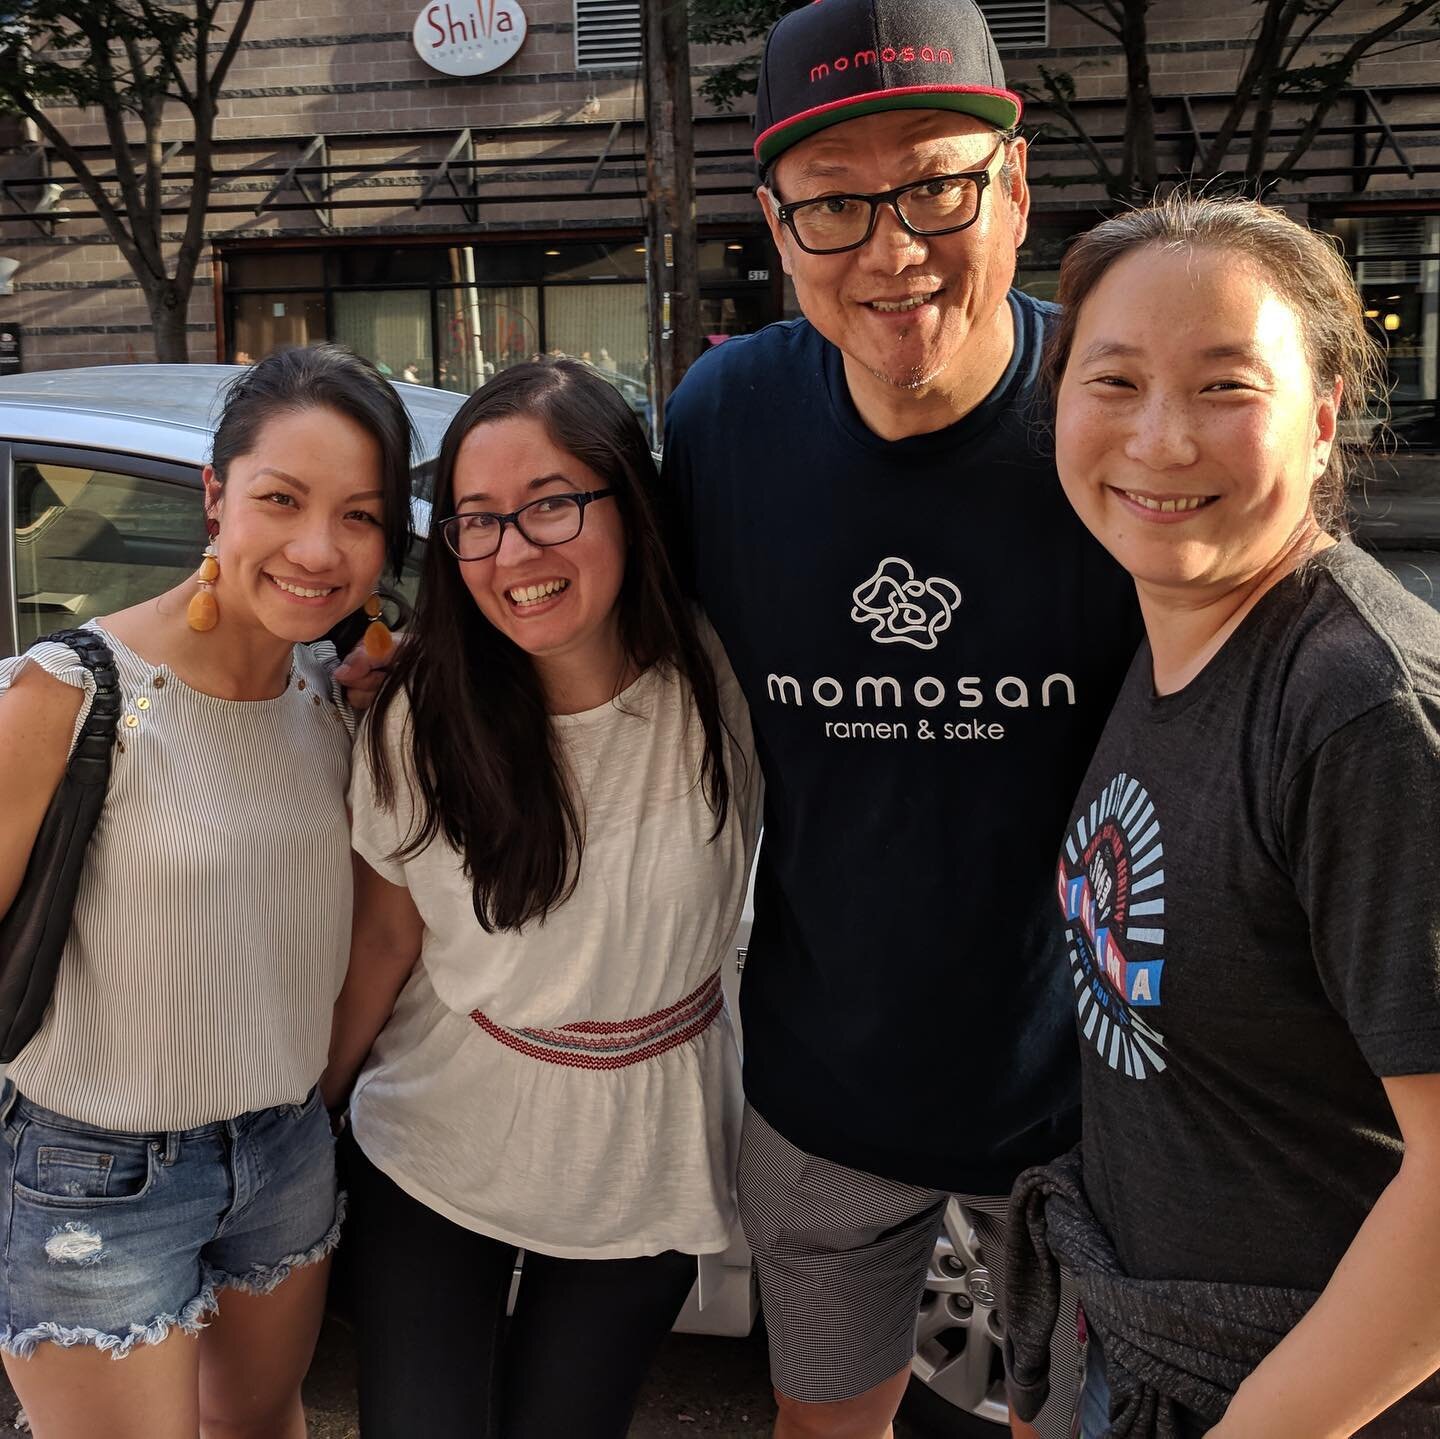 THANK YOU @chef_morimoto for a fabulous dinner on the opening night at @momosanseattle in #Seattle!! We all had a great time and the food was DELICIOUS! 😋 #ironchefmorimoto #morimoto #seattlerestaurants #seattlefoodie #foodie #momosanramen #momosan